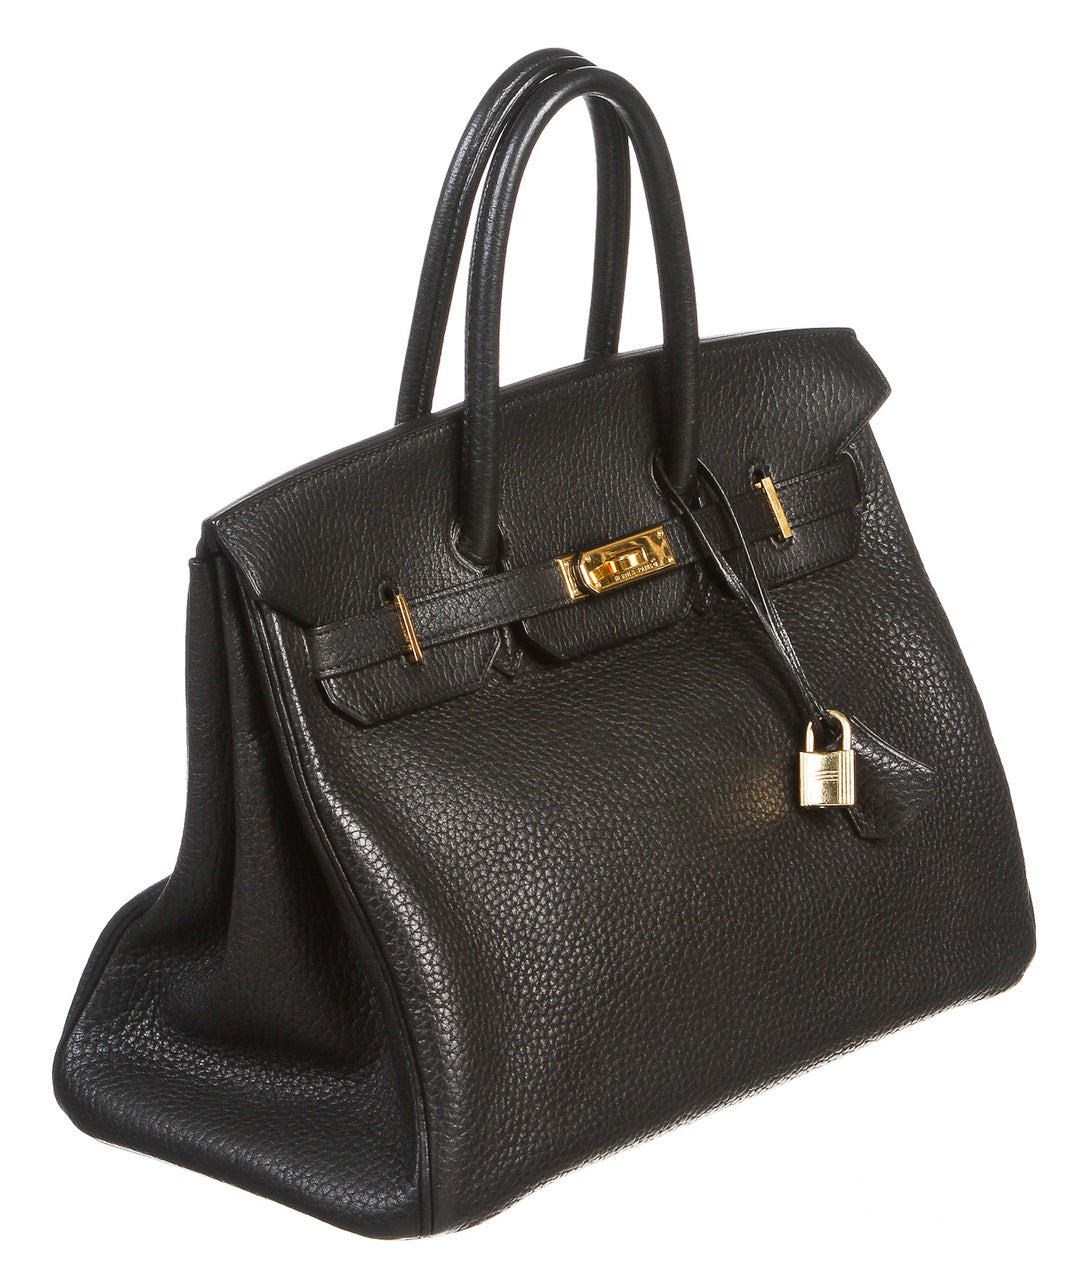 This gorgeous 35cm Birkin has been crafted from black leather which is noted for rich texture and durability. This Birkin also features polished gold tone hardware. The interior is lined in luxurious leather in matching color. The Birkin is unlike